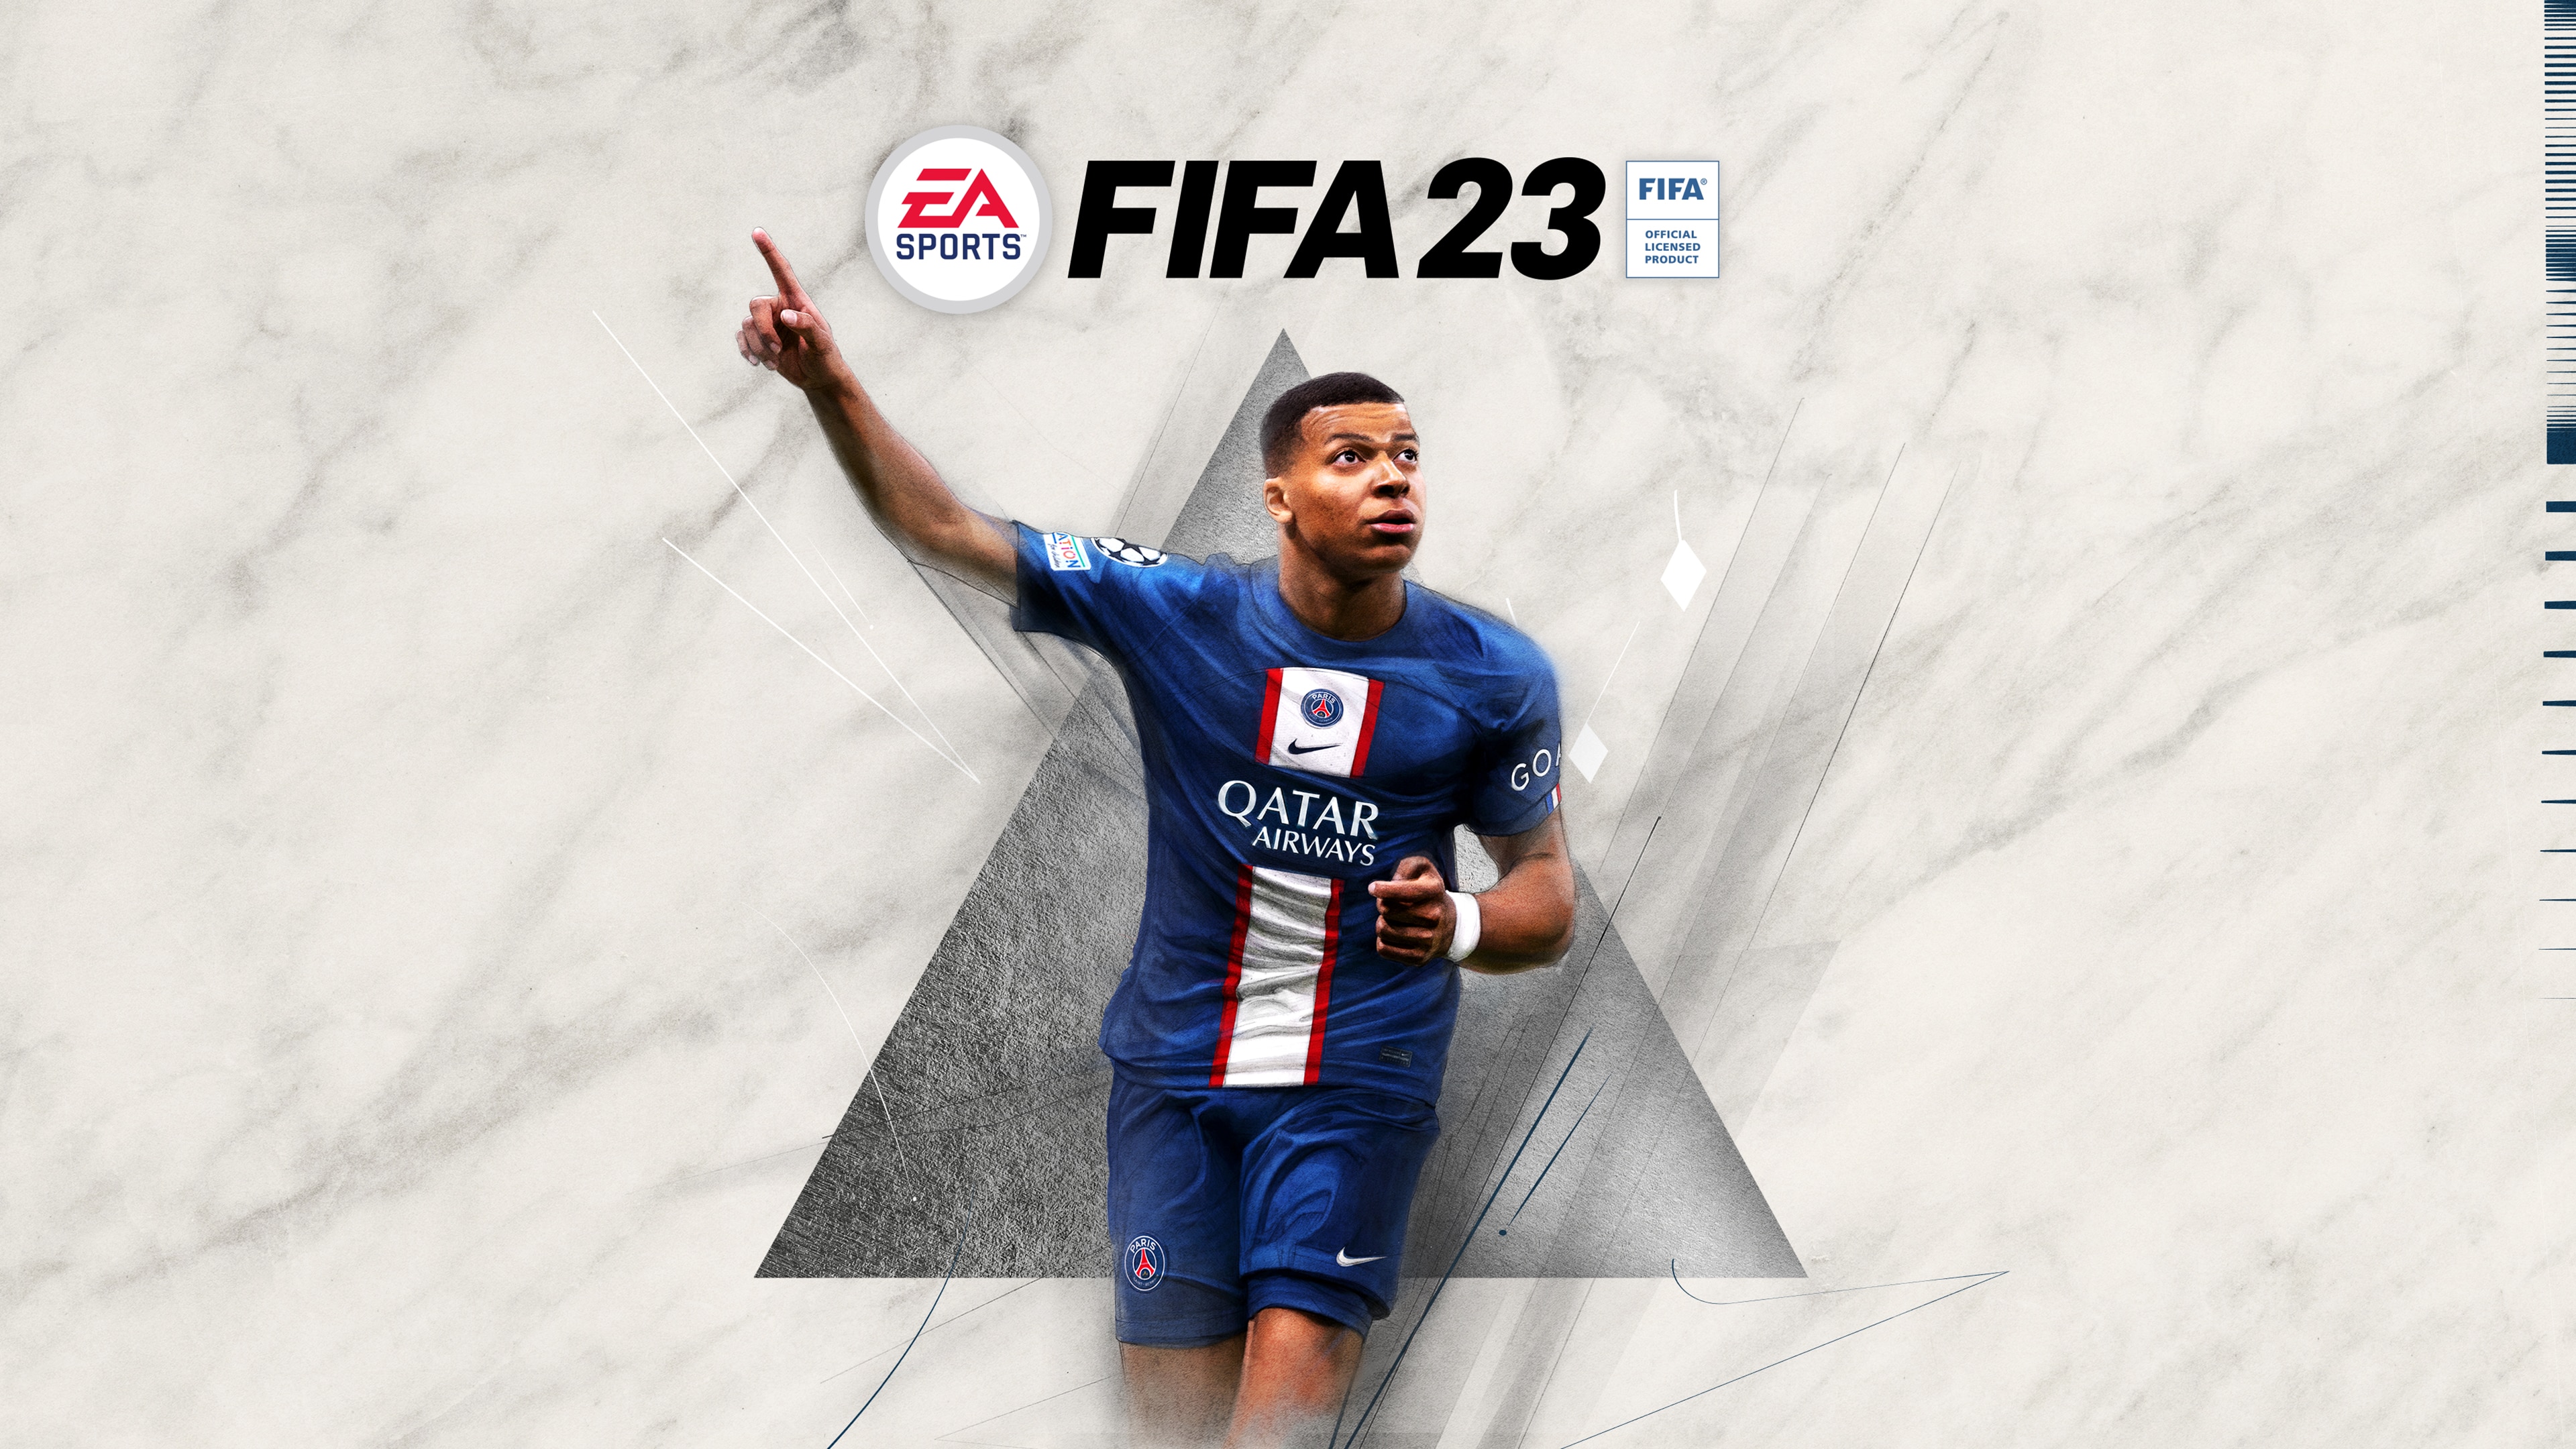 EA com unable to connect FIFA 23, server issue